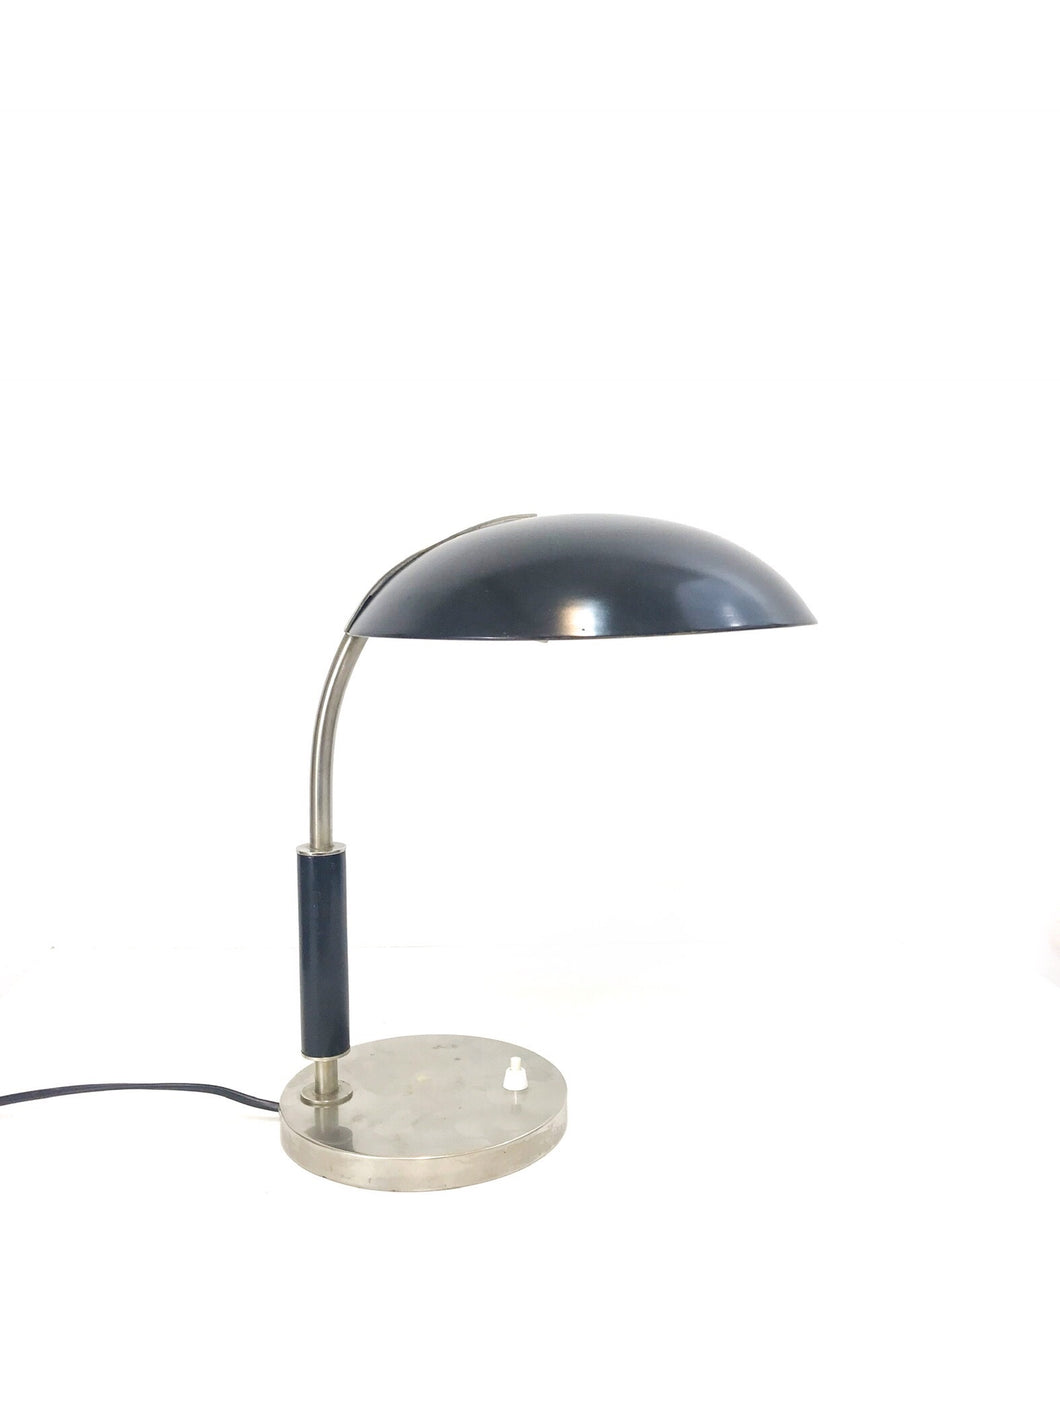 TABLE LAMP BY HARALD NOTINI FOR BÖHLMARKS